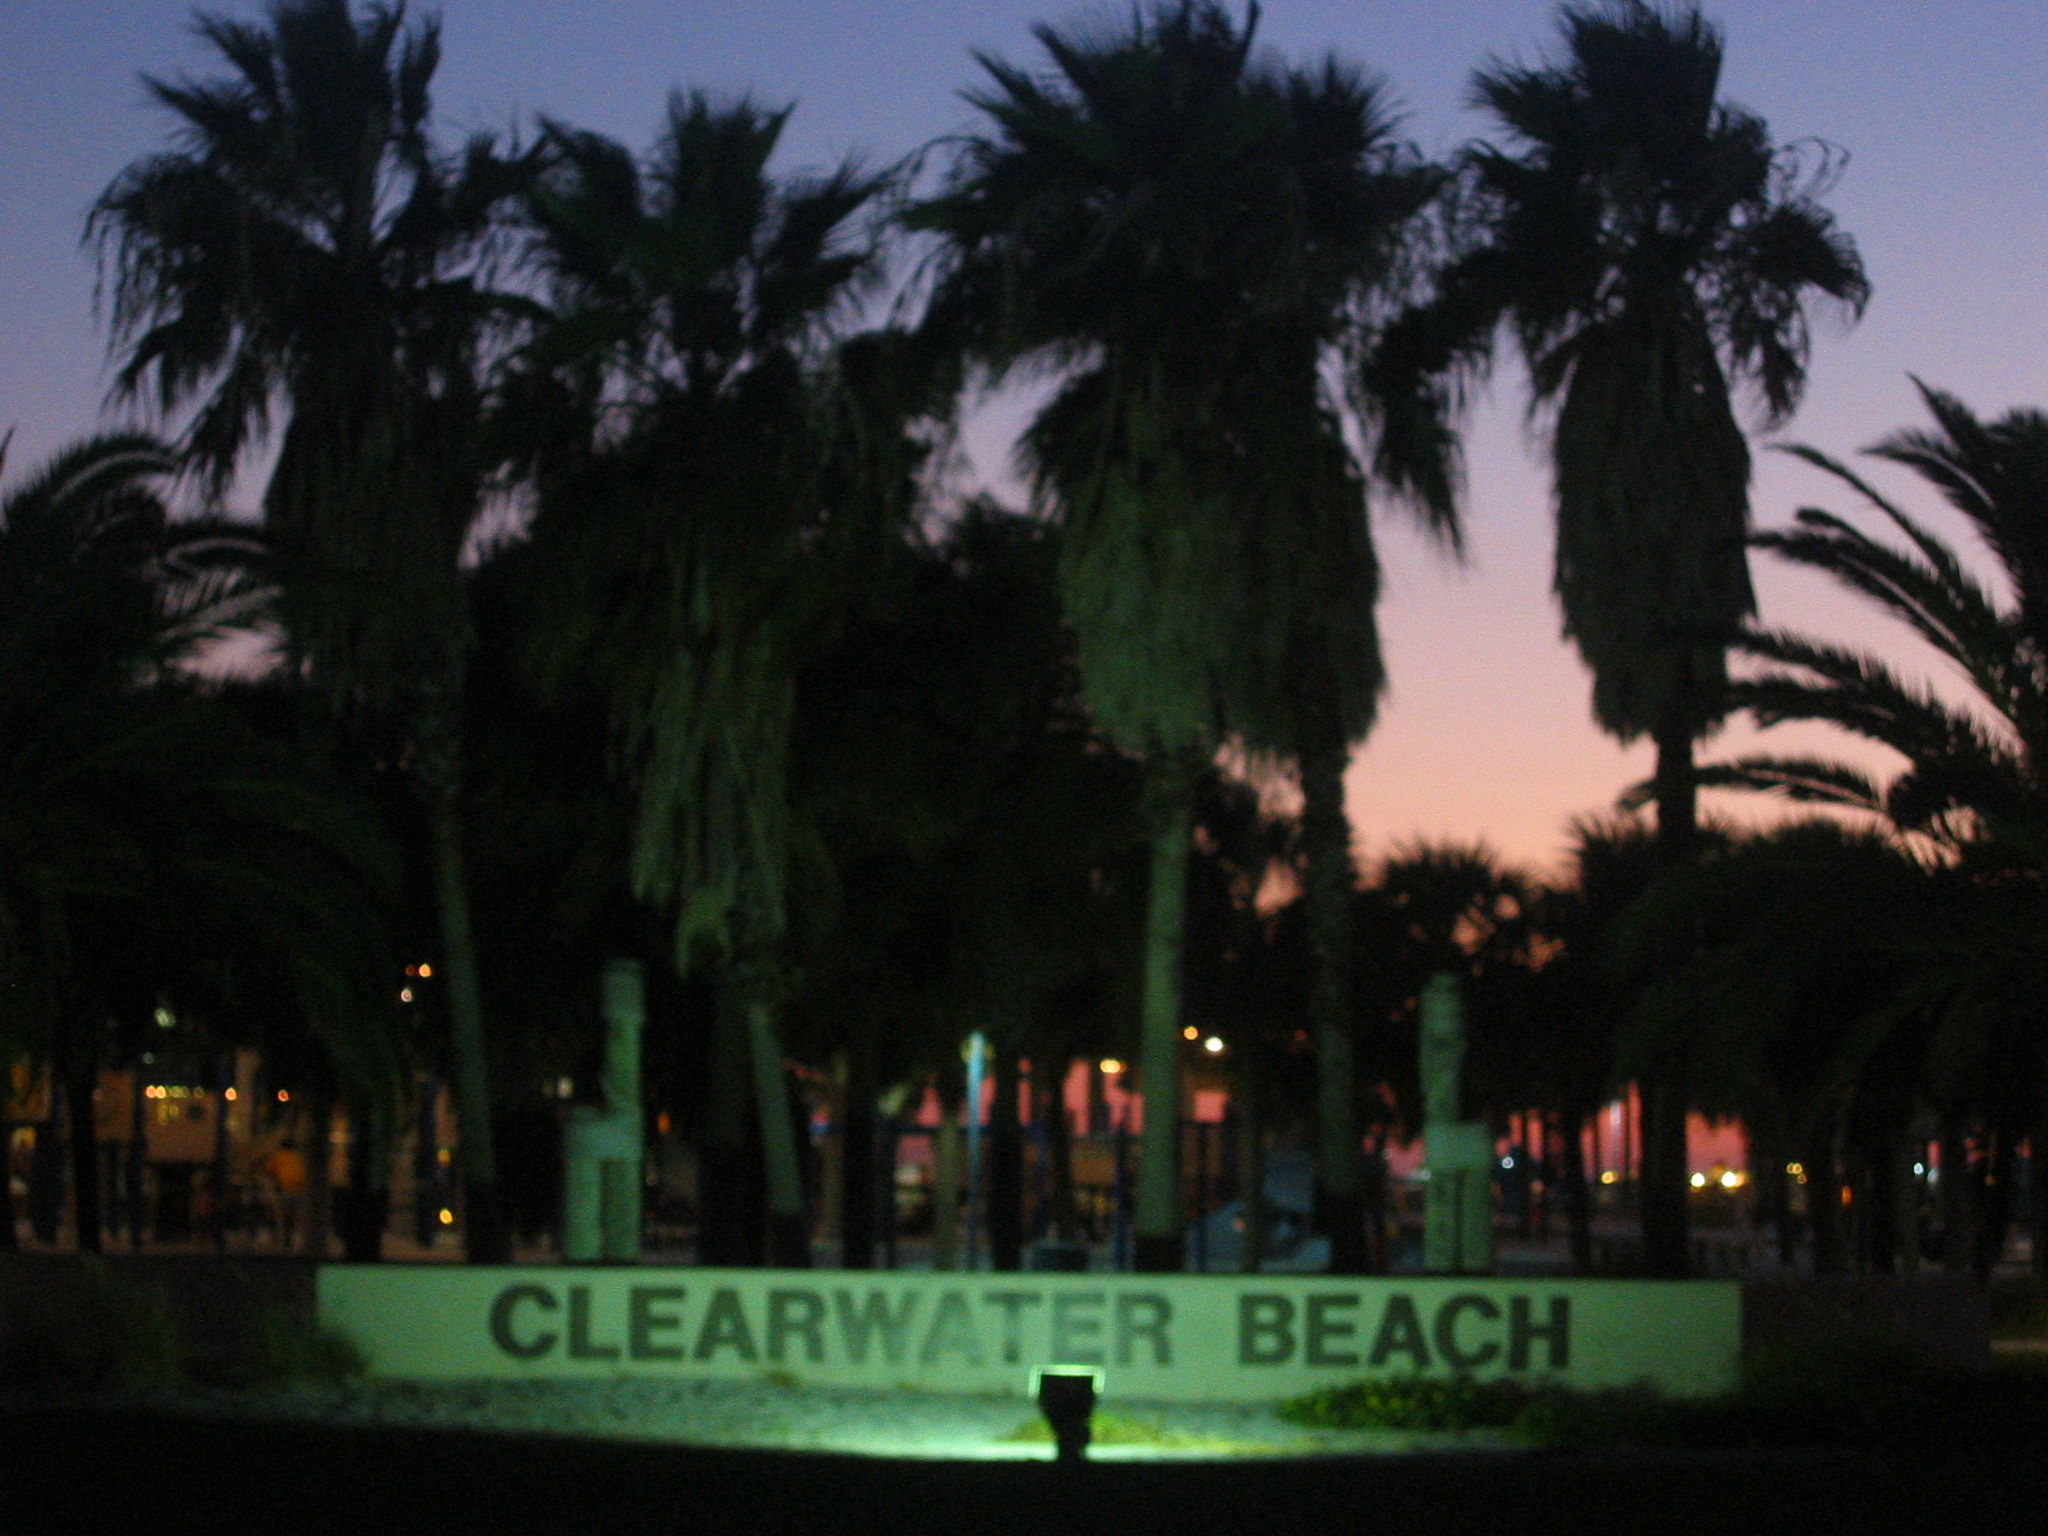 Sign at the foot of Clearwater Beach